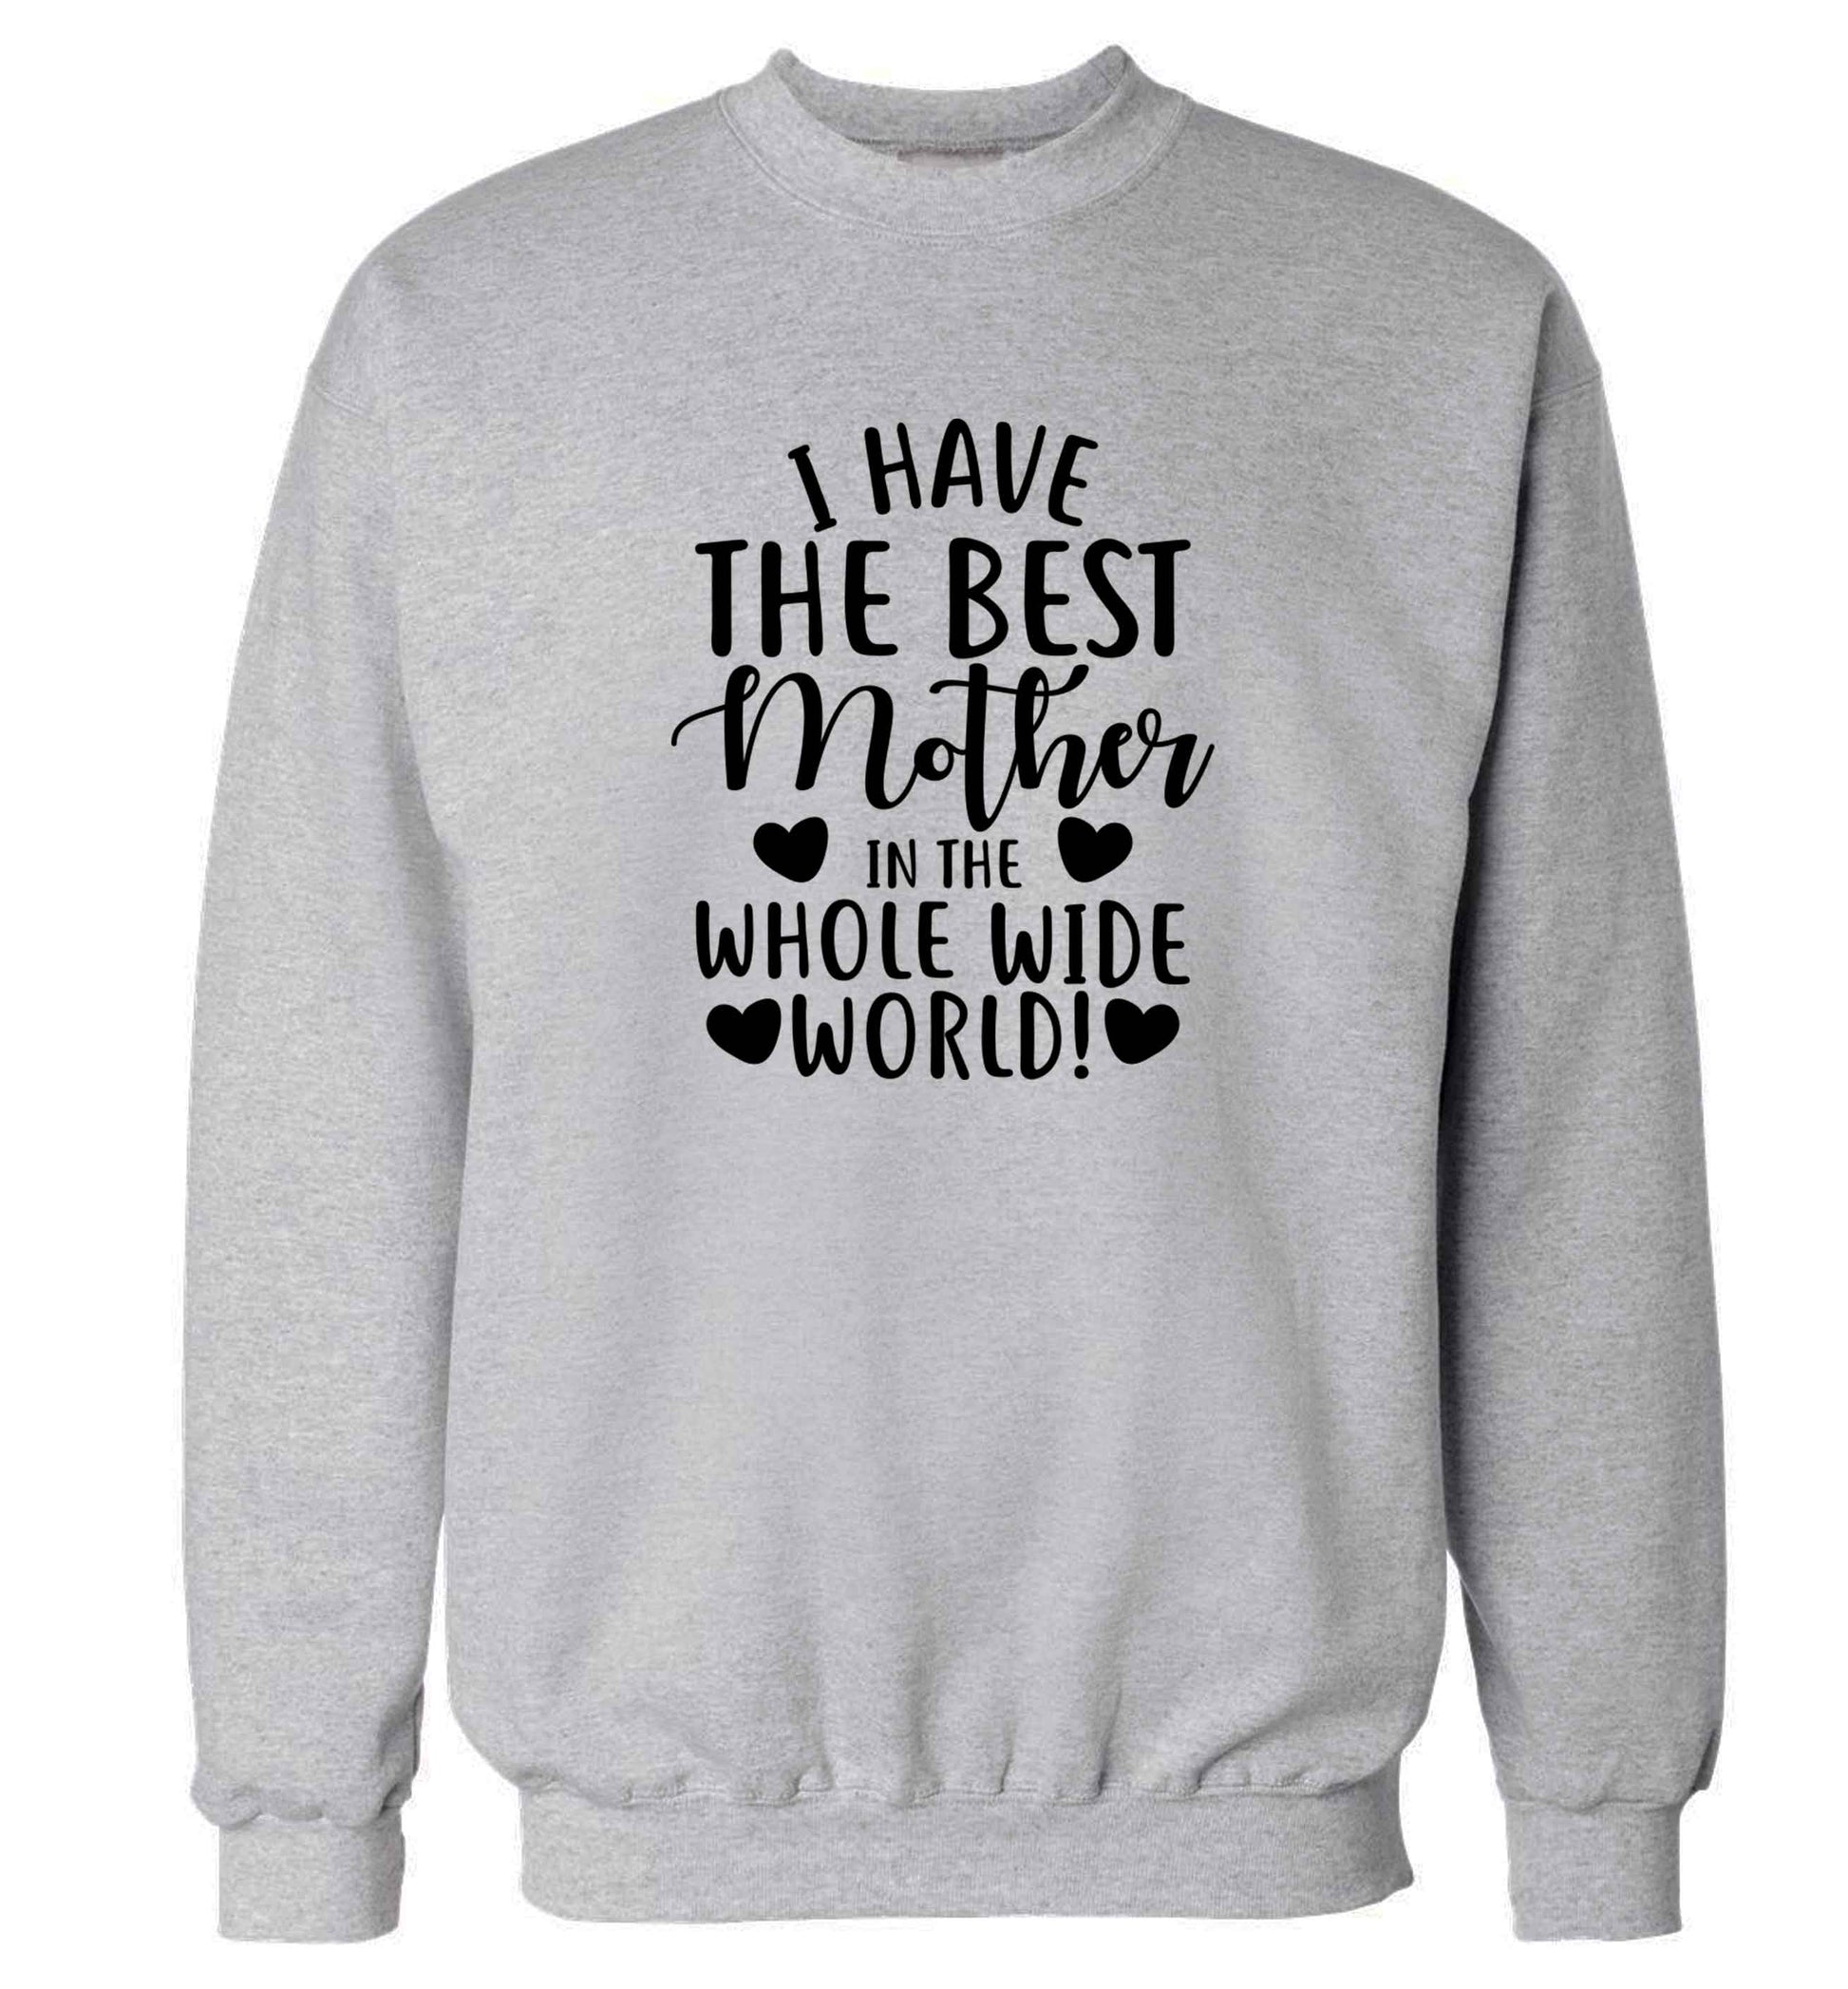 I have the best mother in the whole wide world adult's unisex grey sweater 2XL